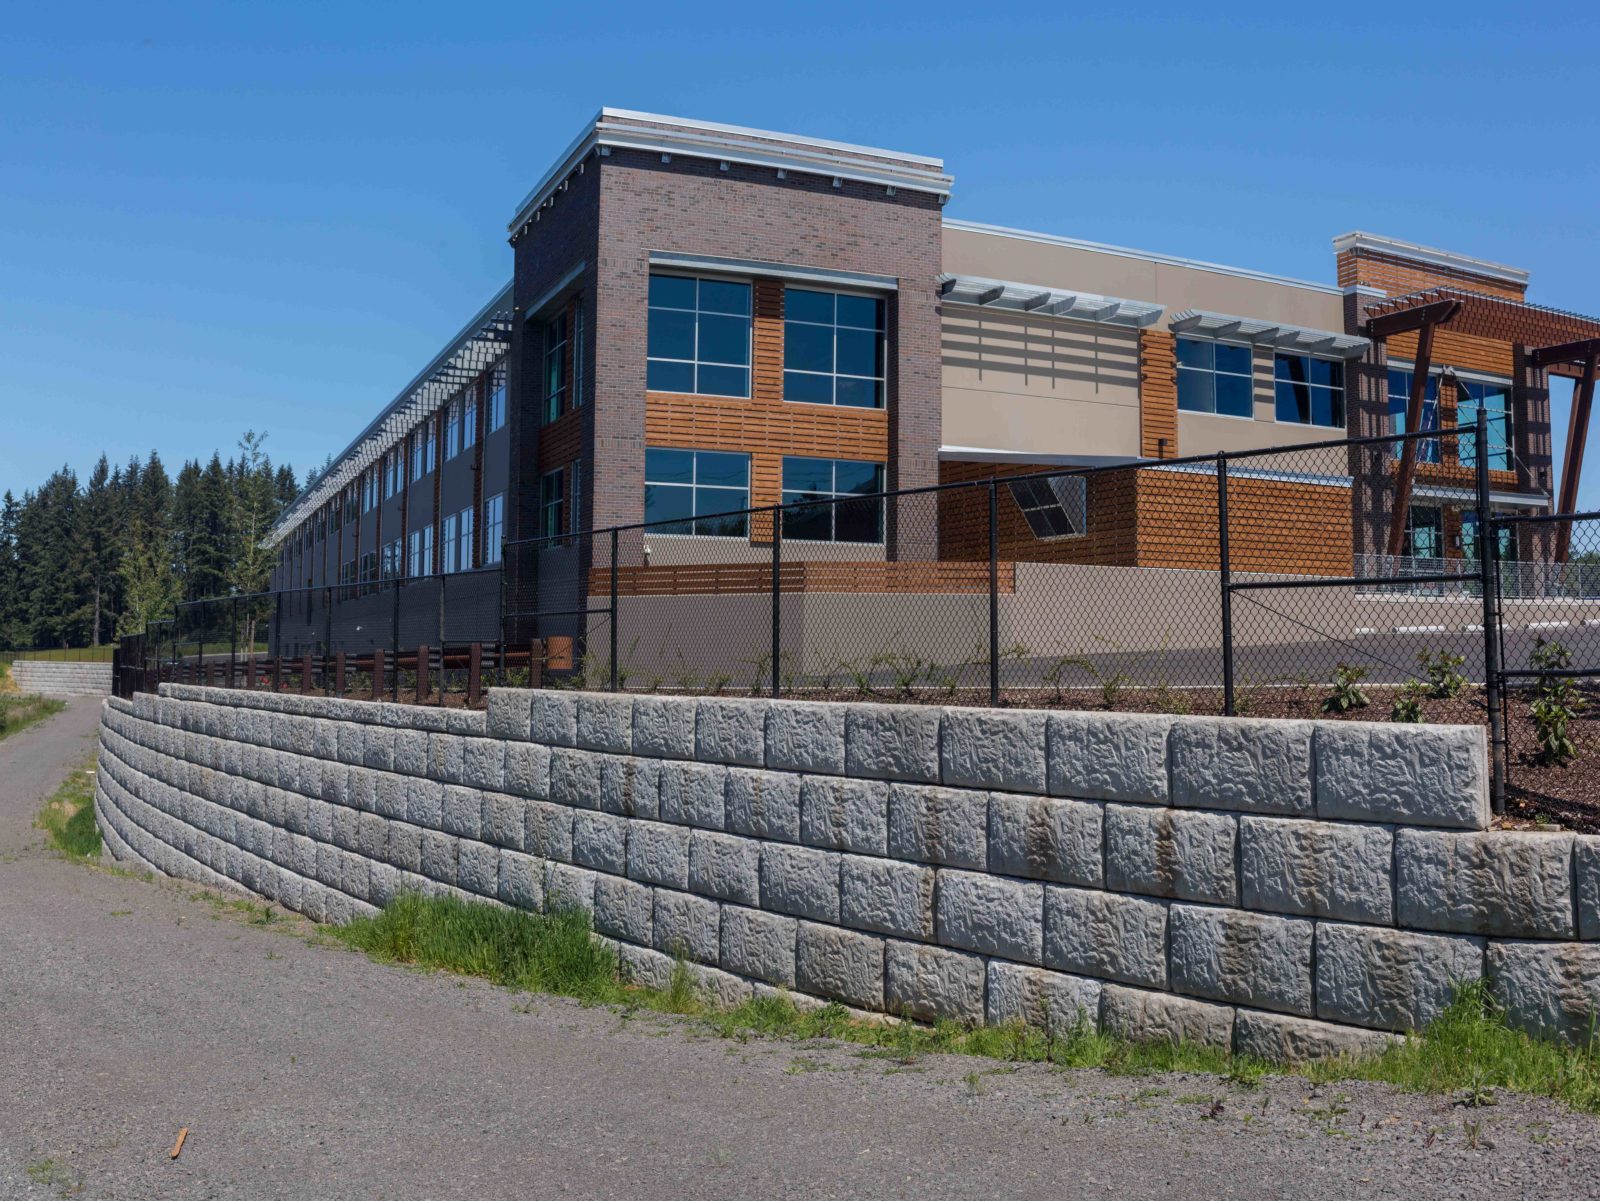 Dwyer Creek Business park, Camas, Washington, civil engineering, planning, surveying, retaining wall, completed project